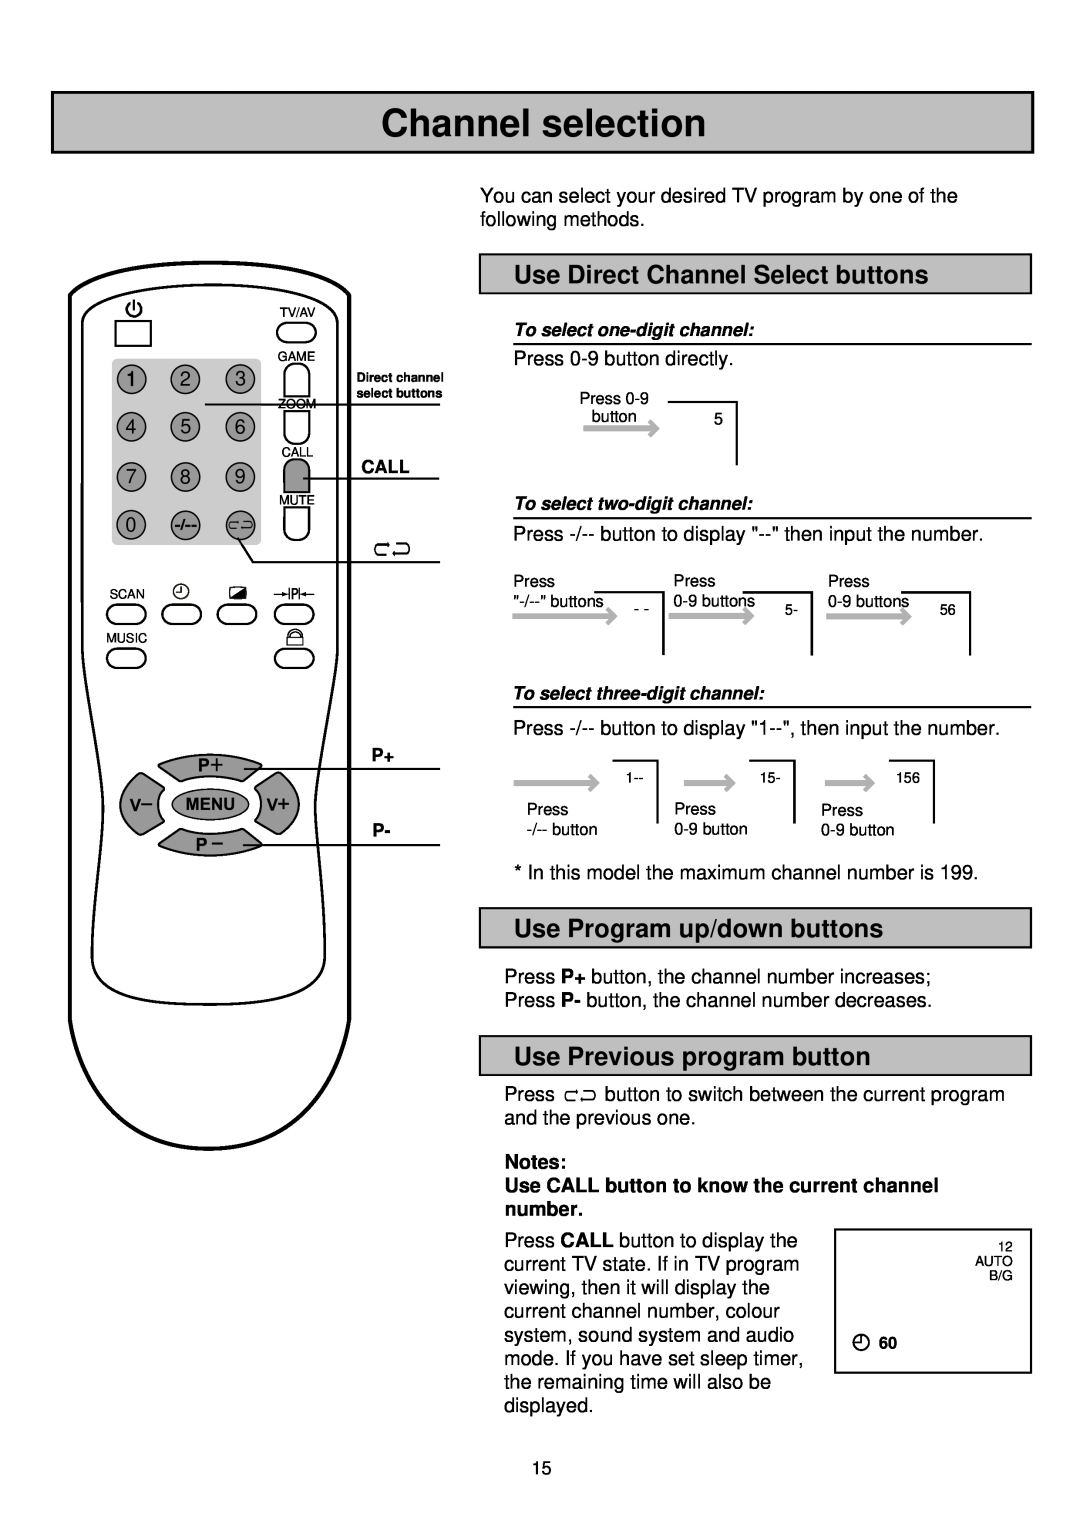 Palsonic 6835TK owner manual Channel selection, Use Direct Channel Select buttons, Use Program up/down buttons 